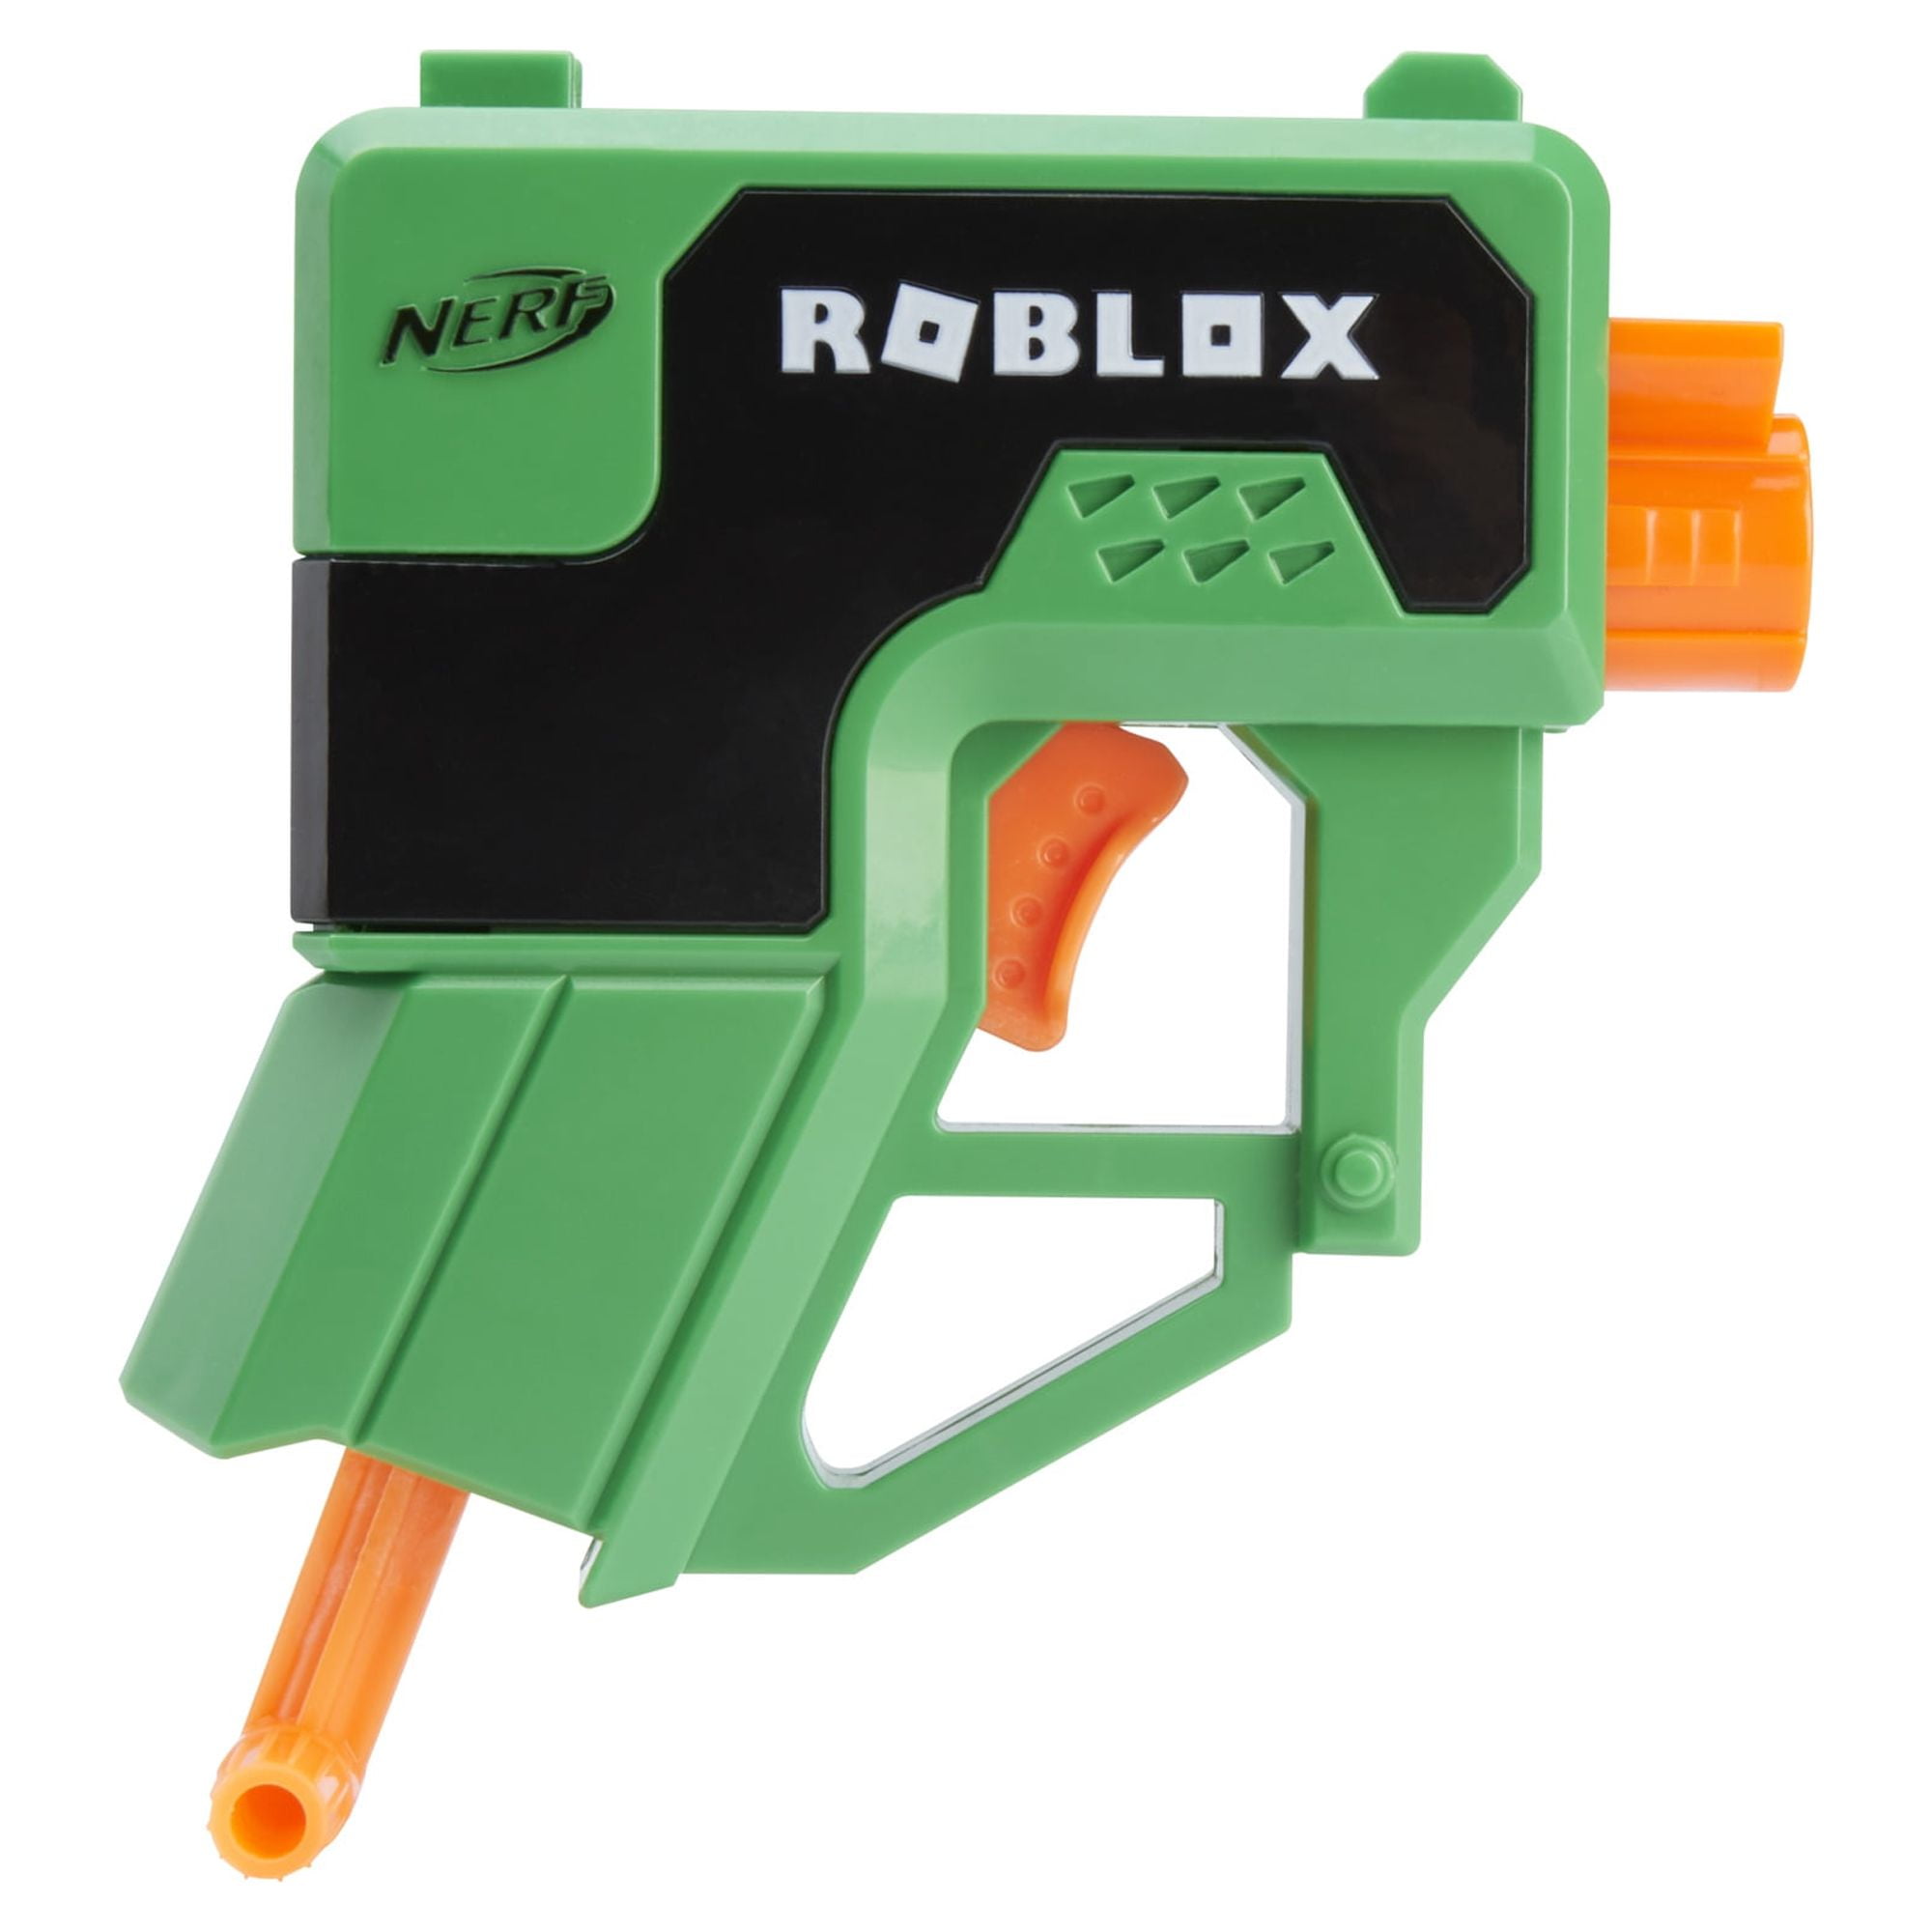 🔶Pirate RX 🔶 on X: Phantom Forces Nerf Gun has officialy